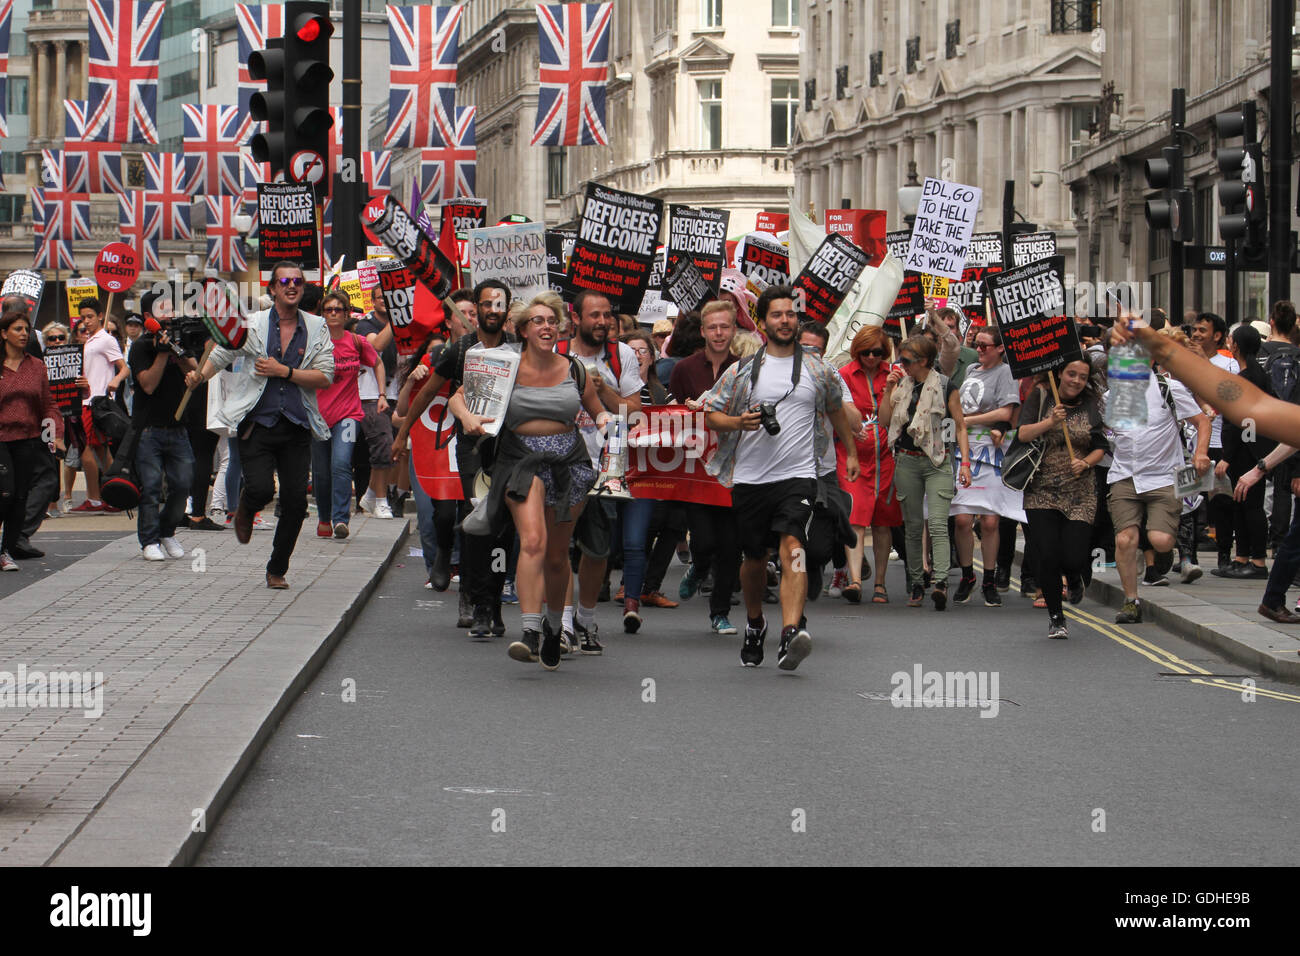 London, UK. 16th July, 2016 Protesters run to catch up on the march at Regent Street. Hundreds of people take part in a demonstration outside the BBC offices at Portland Place and march to Parliament Square WC1, united in demanding for an end to Austerity, No To Racism and demanding and end to the Tory rule. The demonstration on 16 July called by the People's Assembly and Stand Up to Racism is the positive and united response After the Brexit referendum. Credit:  david mbiyu/Alamy Live News Stock Photo